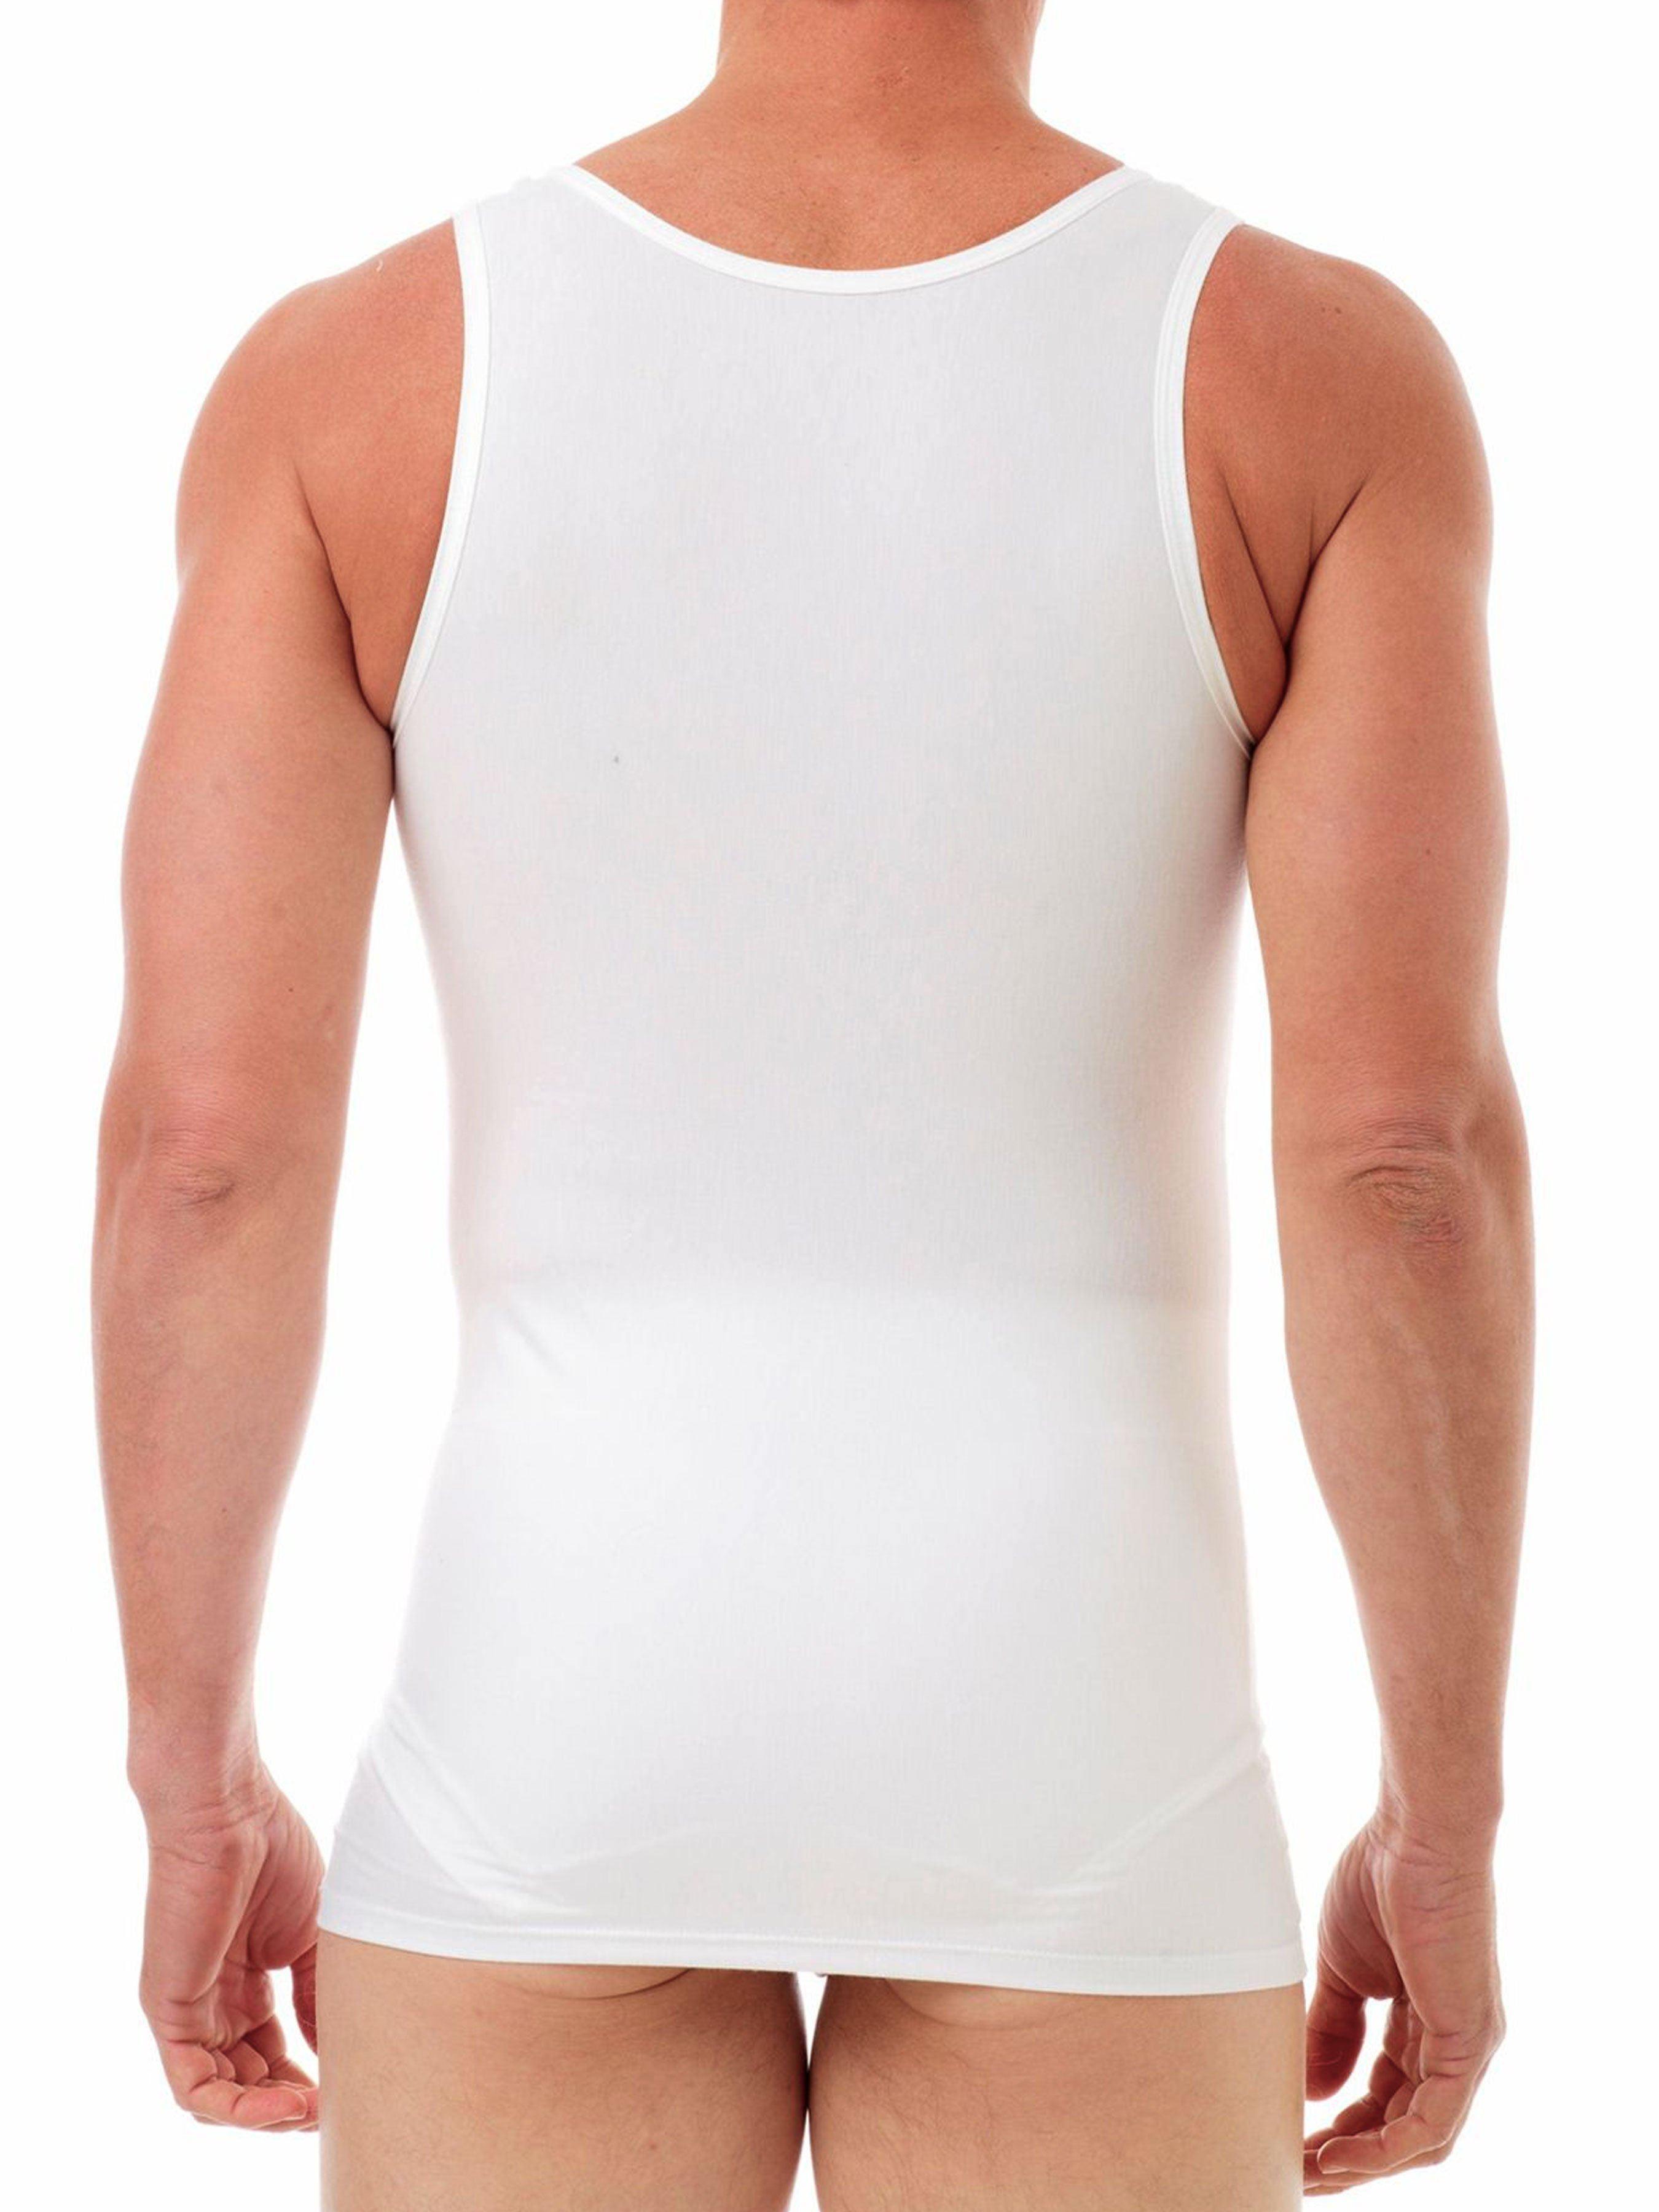 Power Compression Post Surgical Men Compression Shirts,, 52% OFF